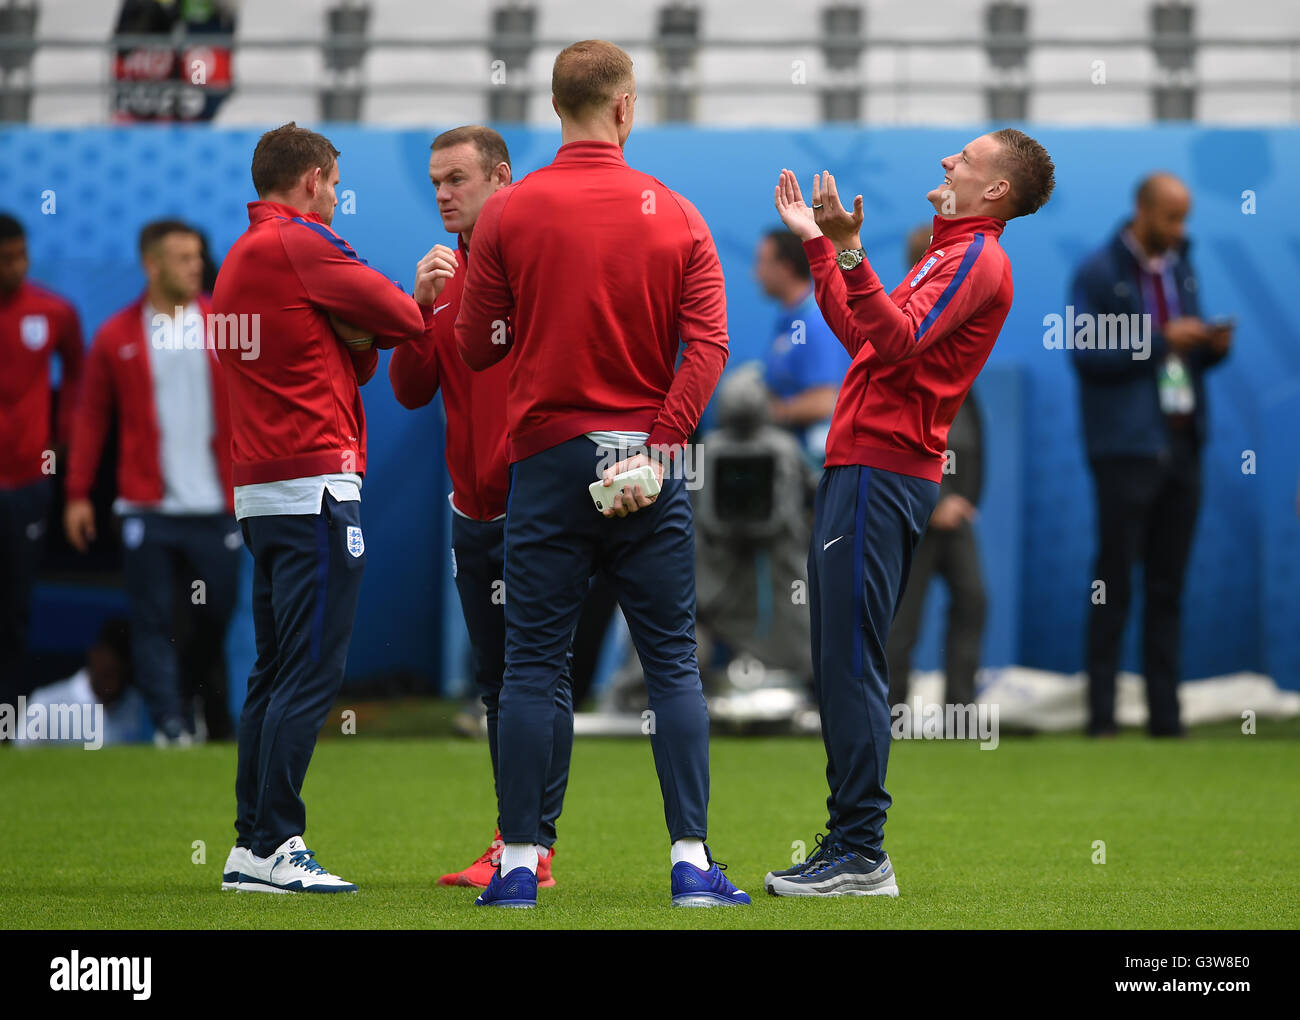 England's (left to right) James Milner, Wayne Rooney, Joe Hart and Jamie Vardy during the walk around at the Stade Felix Bollaert-Delelis, Lens. Stock Photo